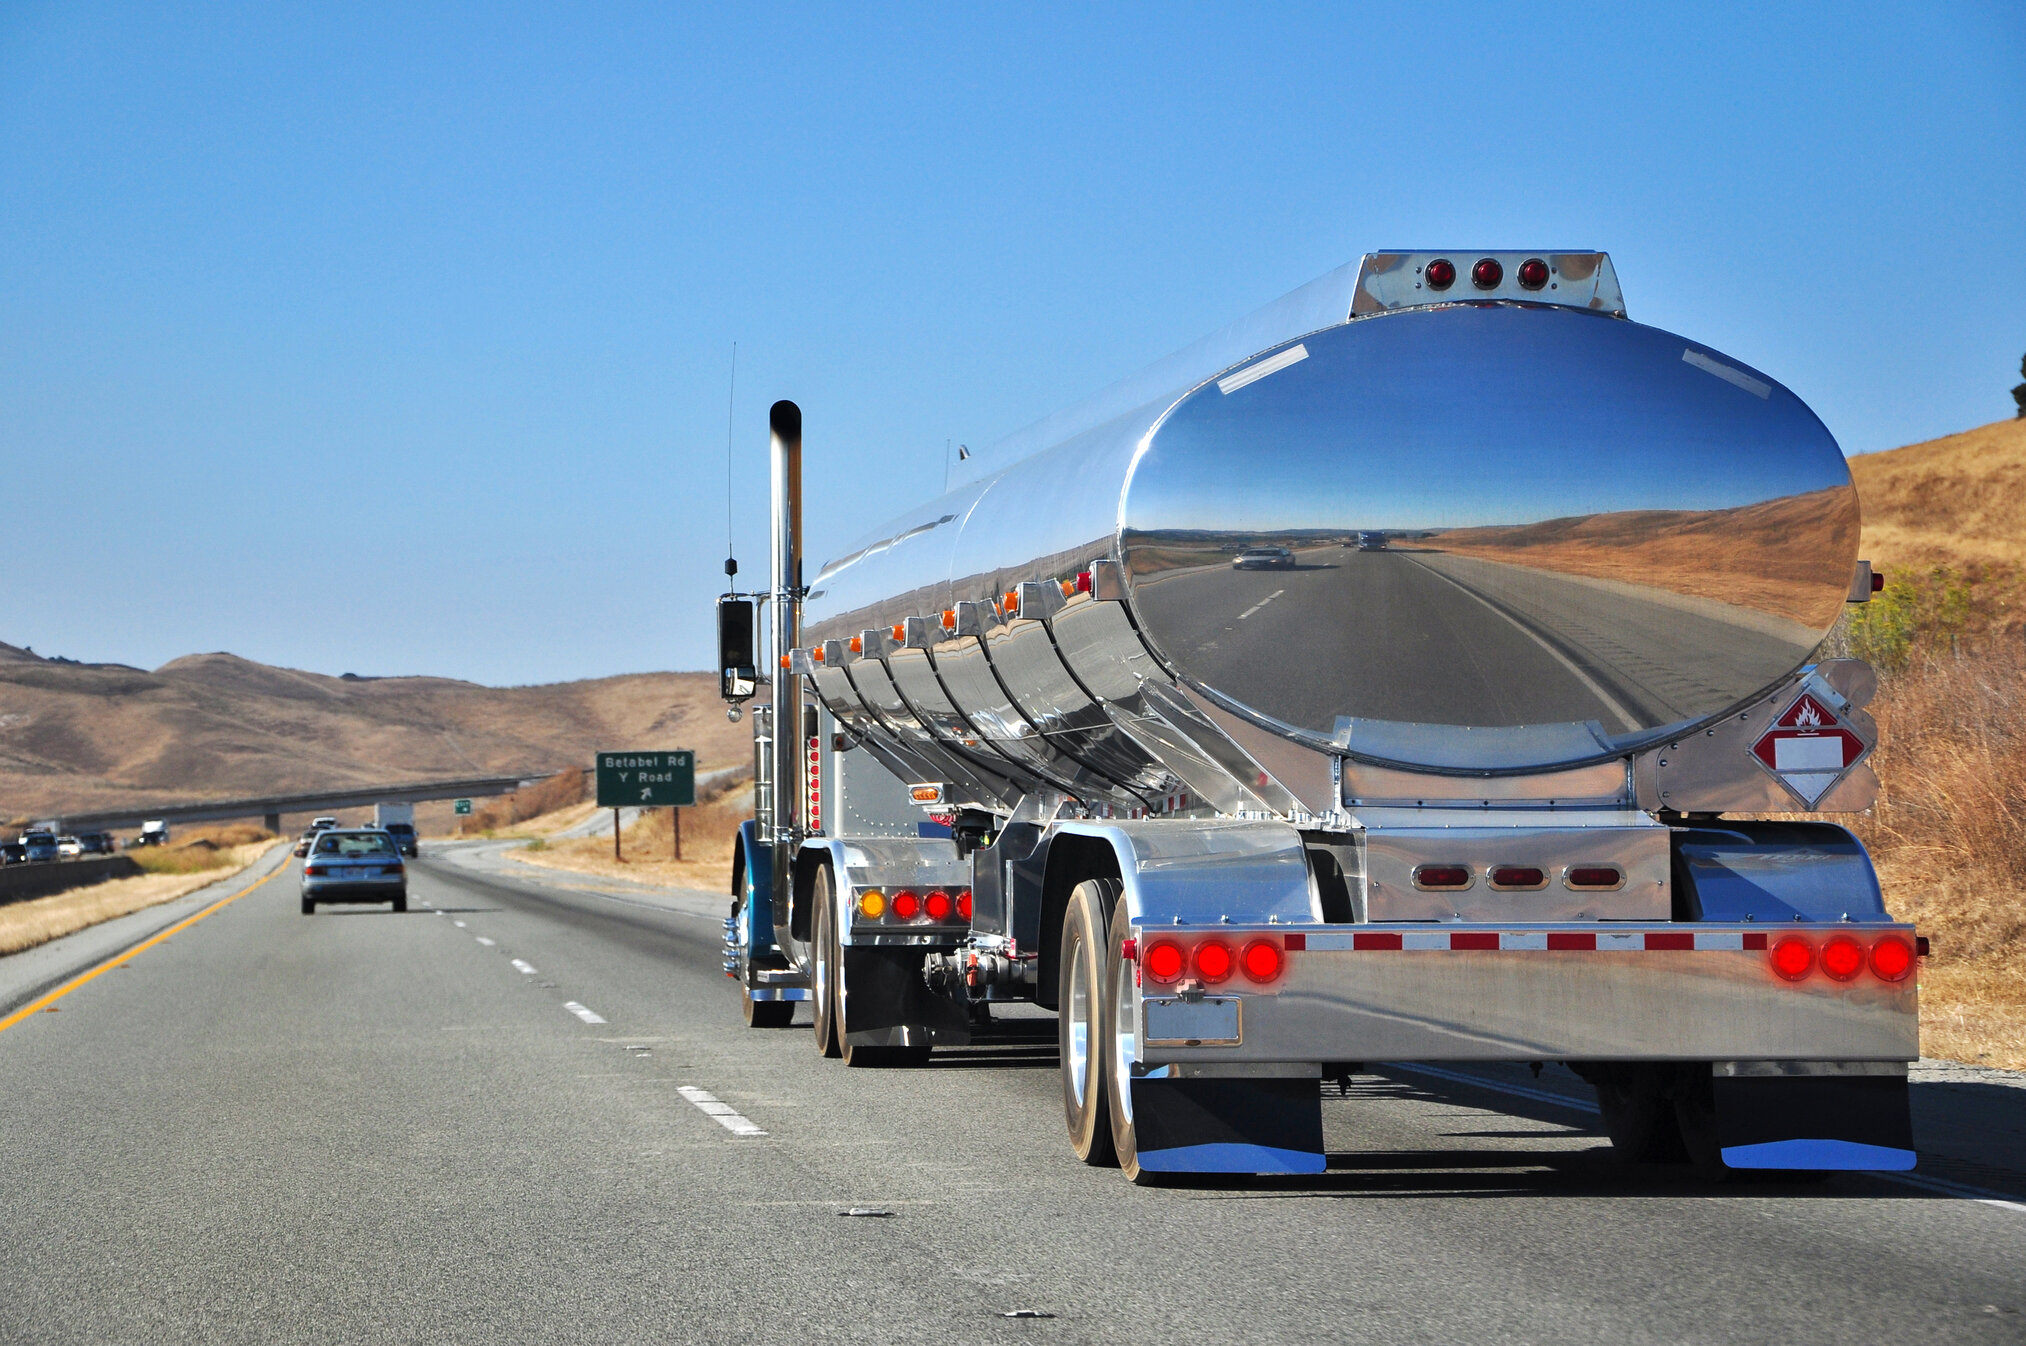 An image of multiple vehicles travelling down a highway. The focus of the image is on a larger tanker truck with rolling hills and a clear blue sky in the background.